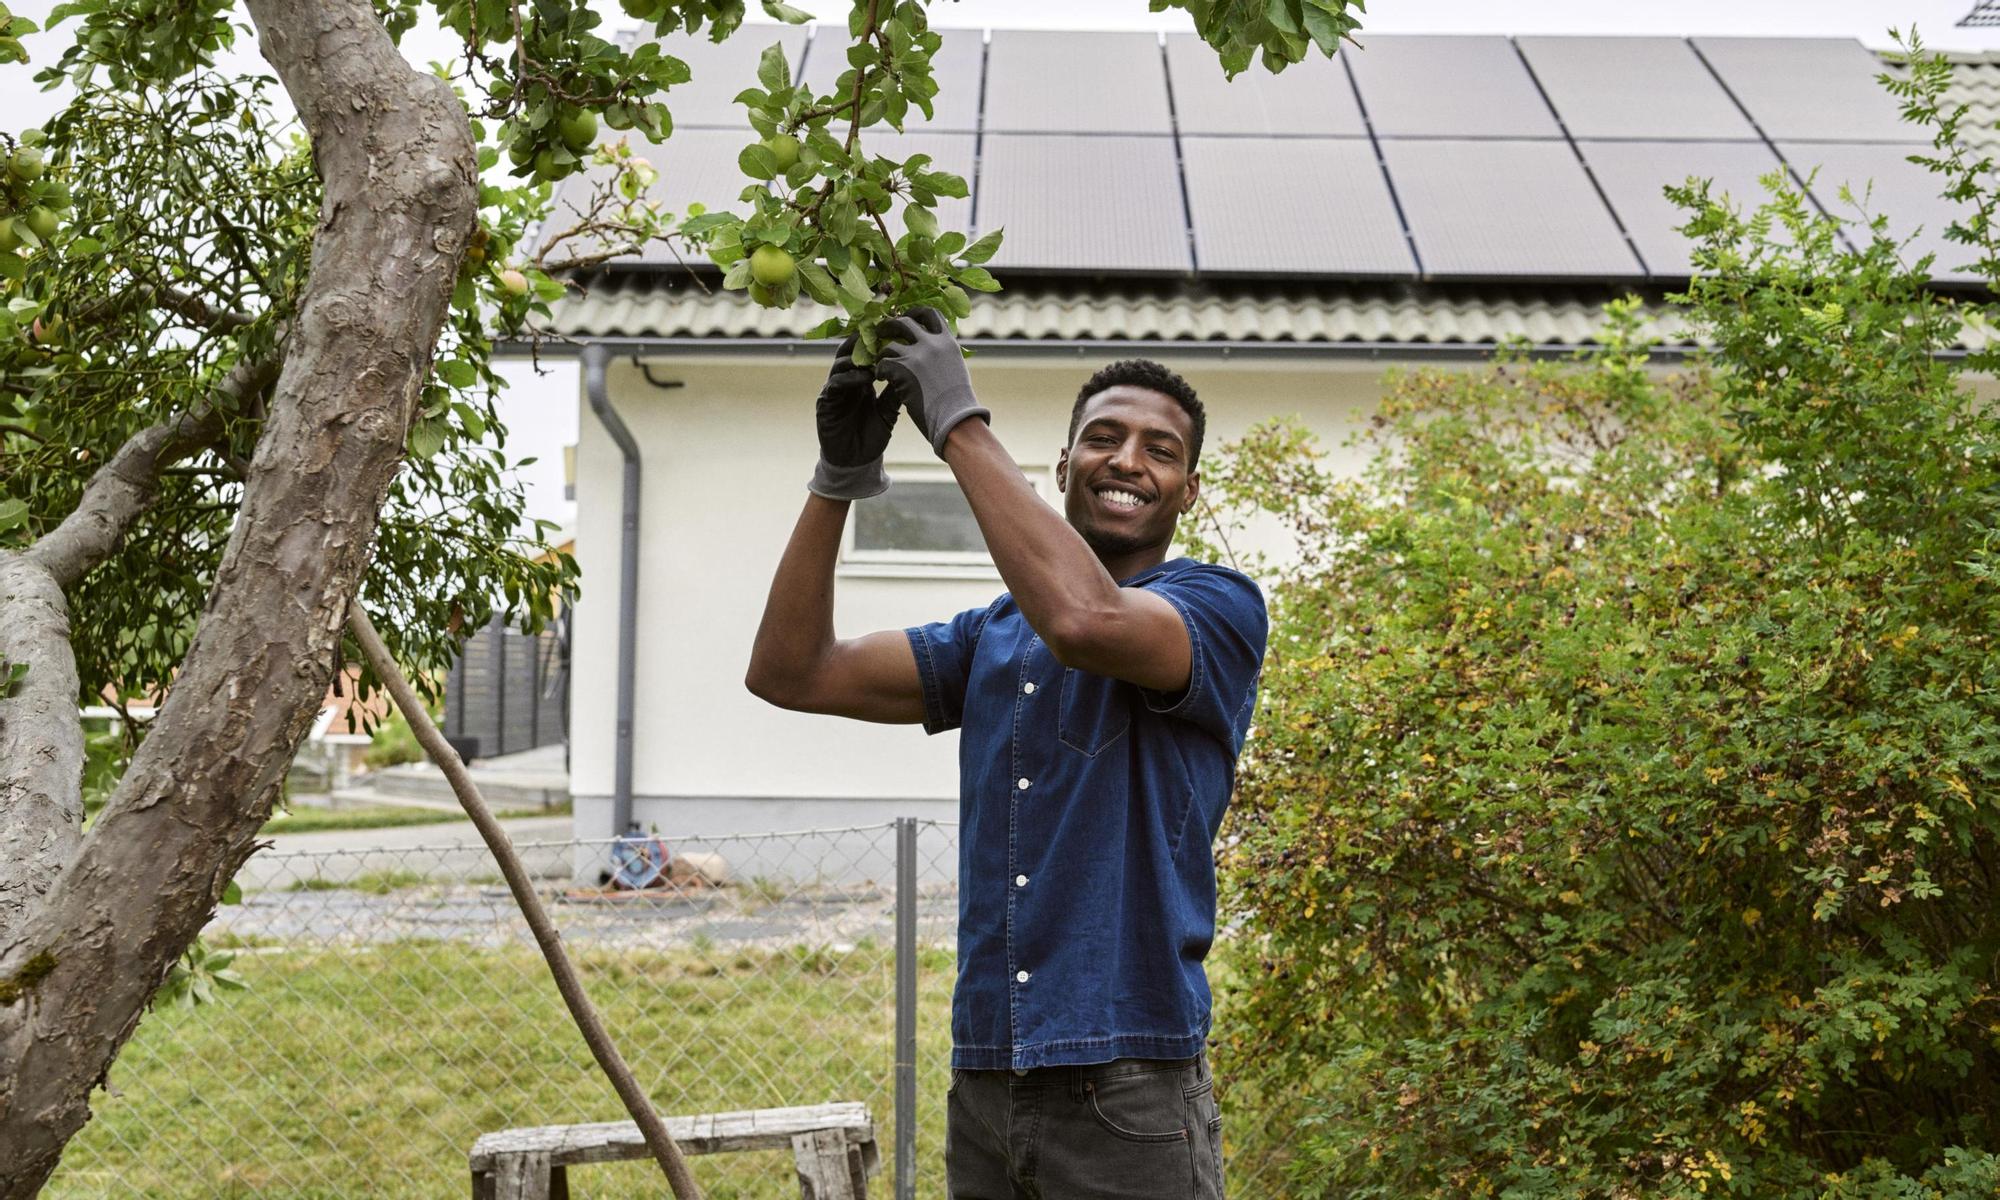 Man picking apples. Solar panels in the background